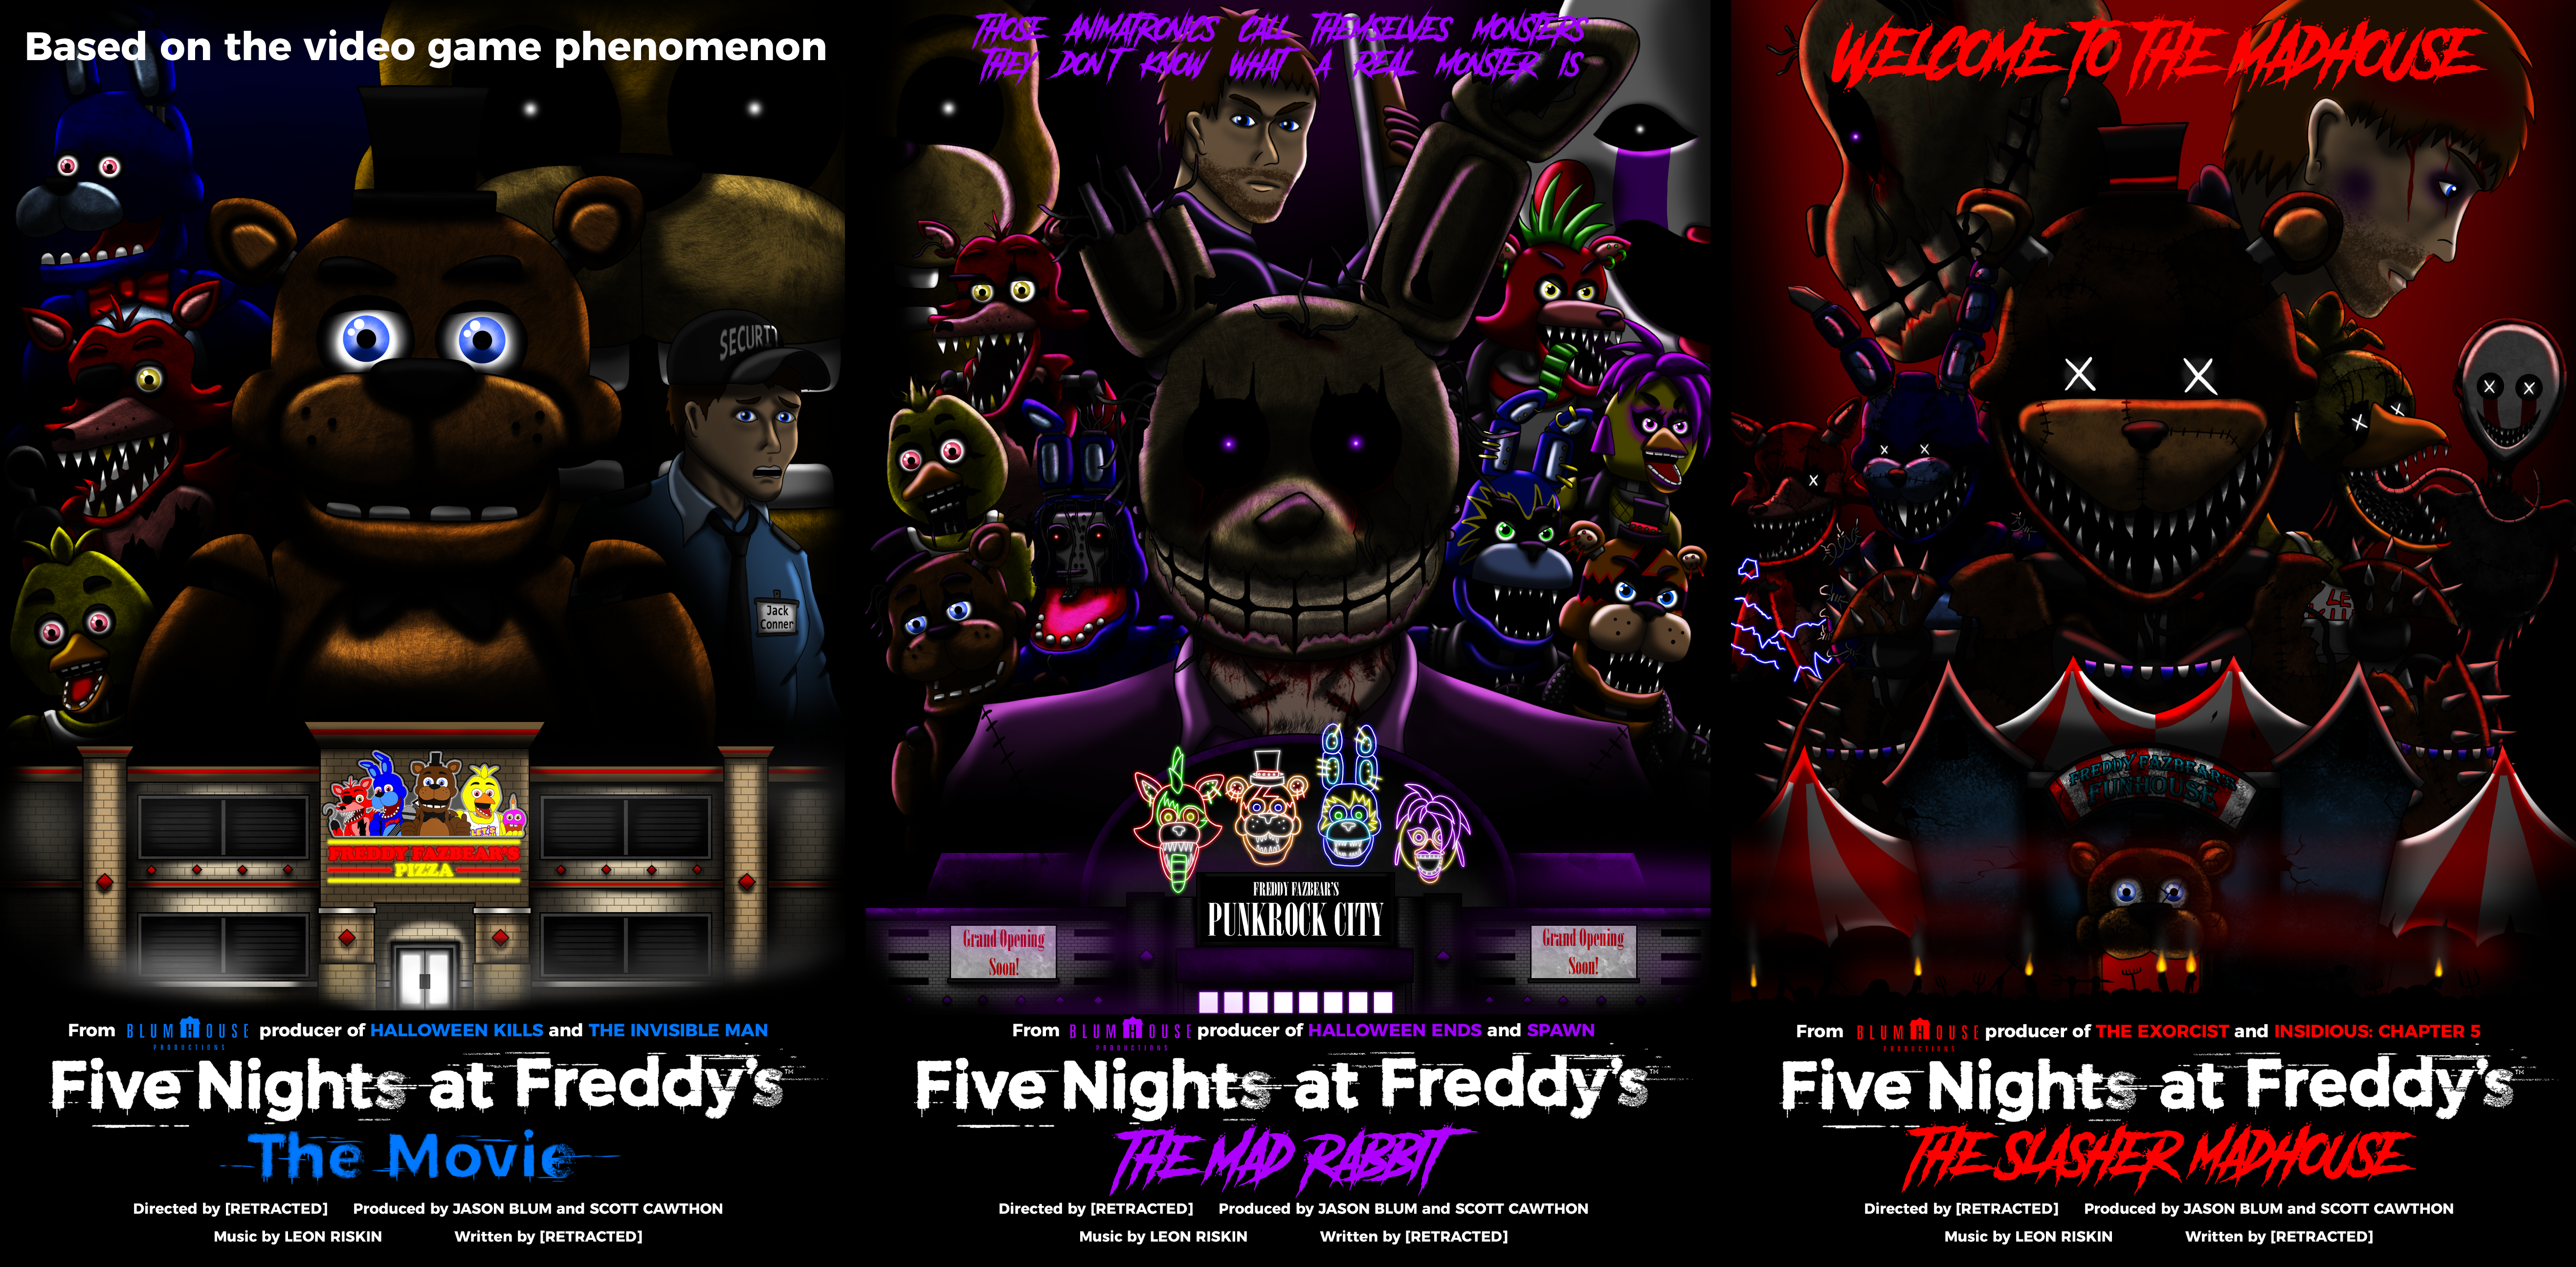 FNaF Fan Made Movie Trilogy Posters Version 2: The Mad Rabbit Trilogy